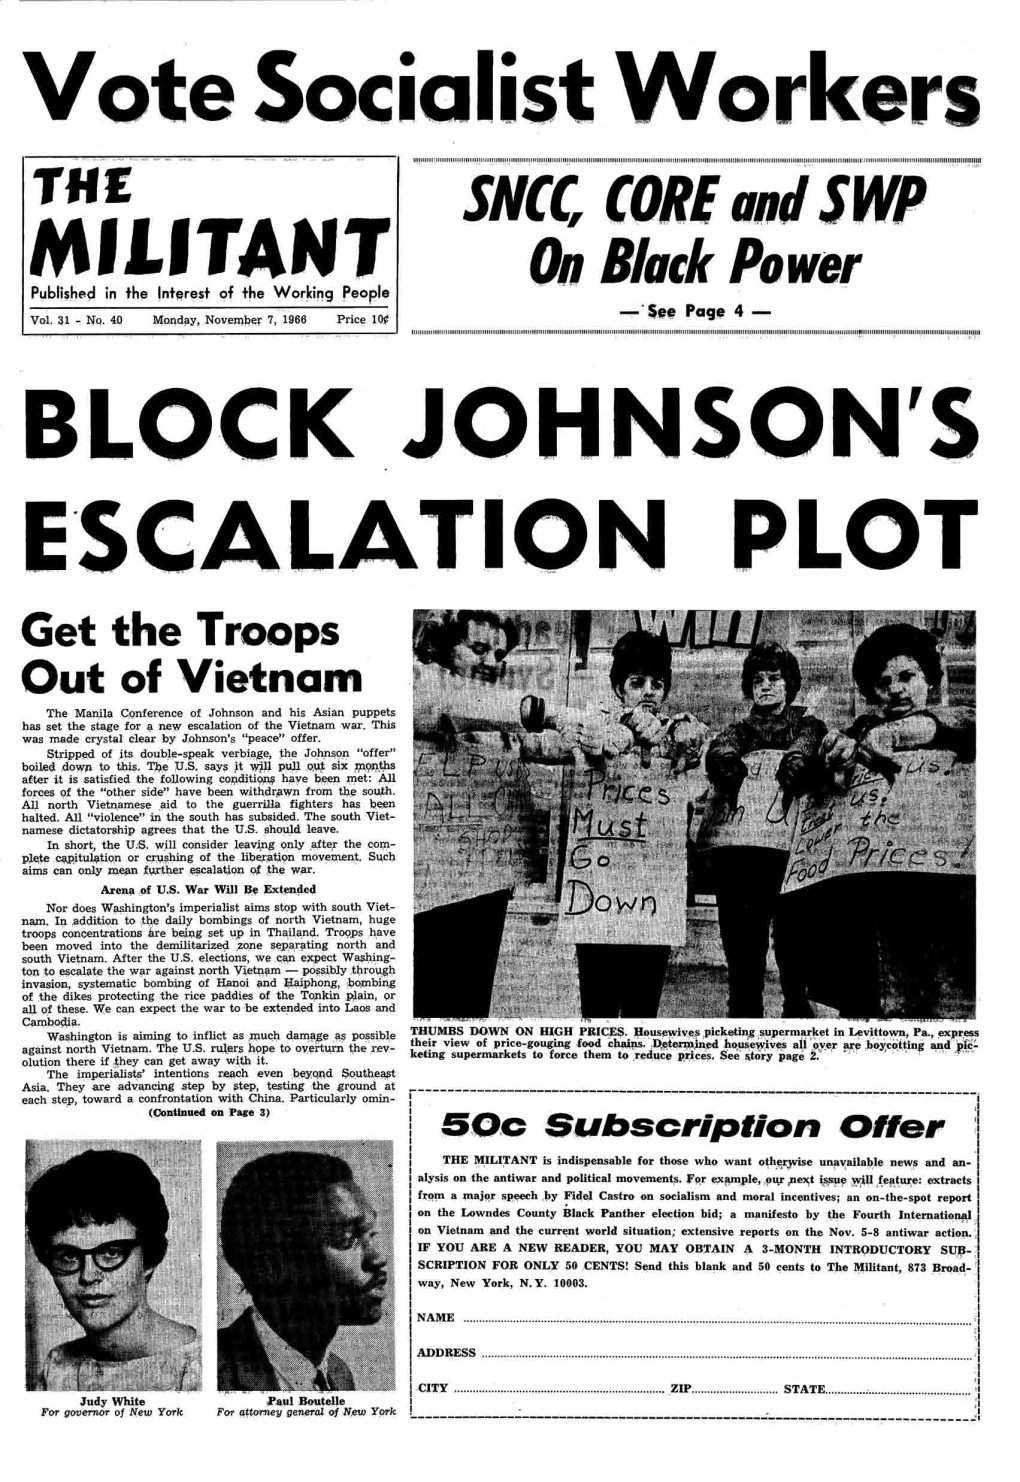 An Historic Election Bid by Black Panther Party